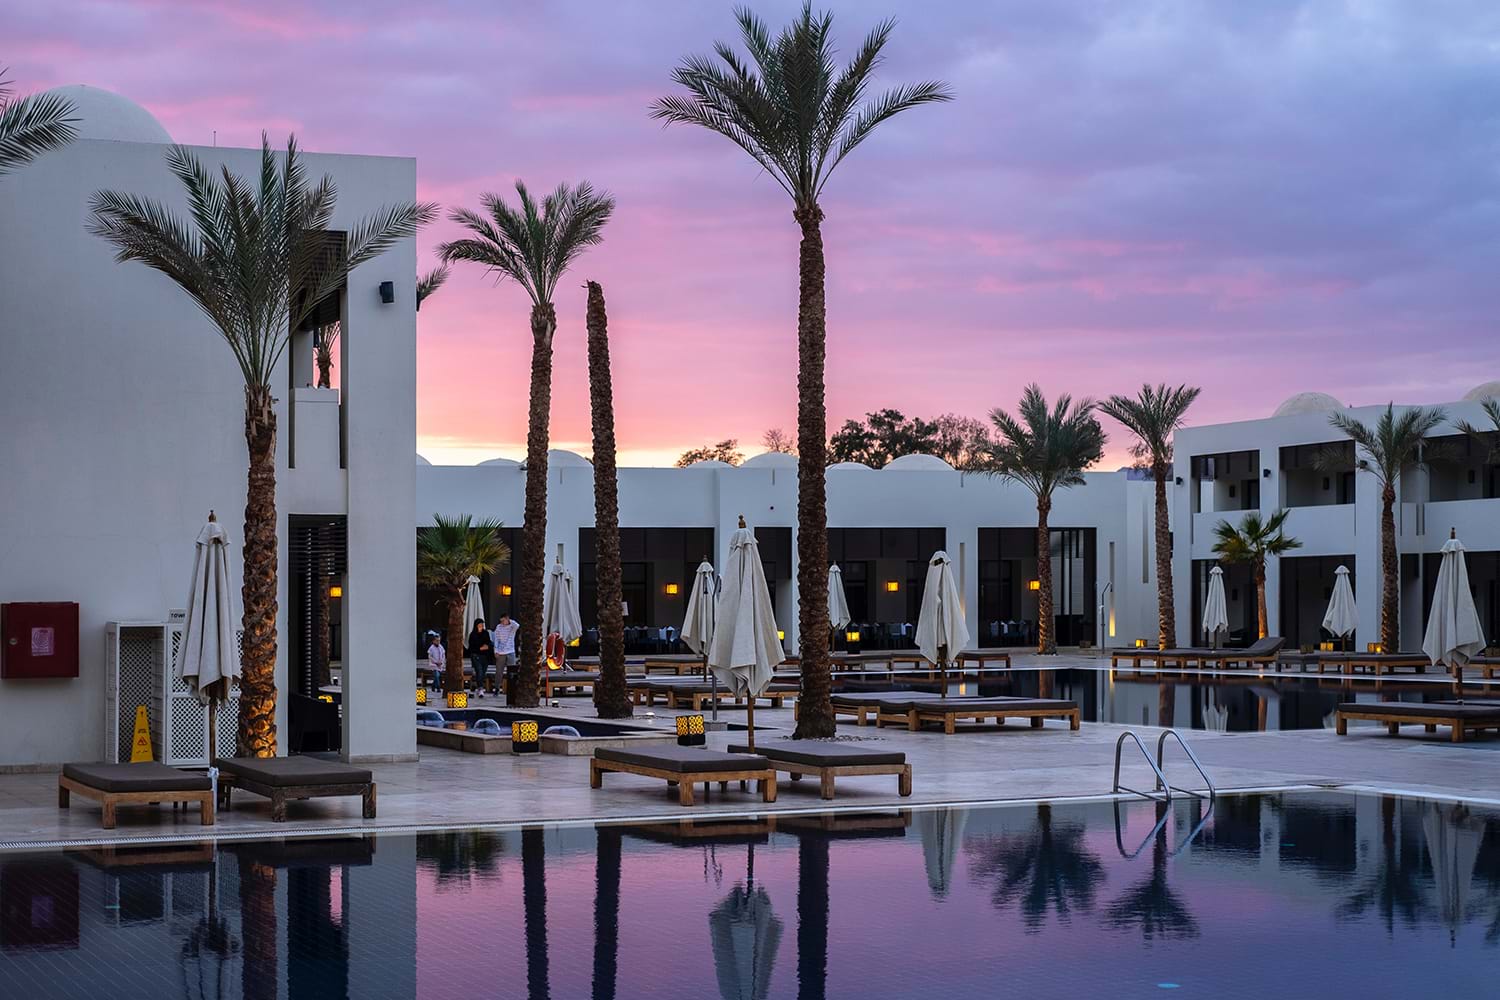 Hotel pool courtyard with violet sunset sky